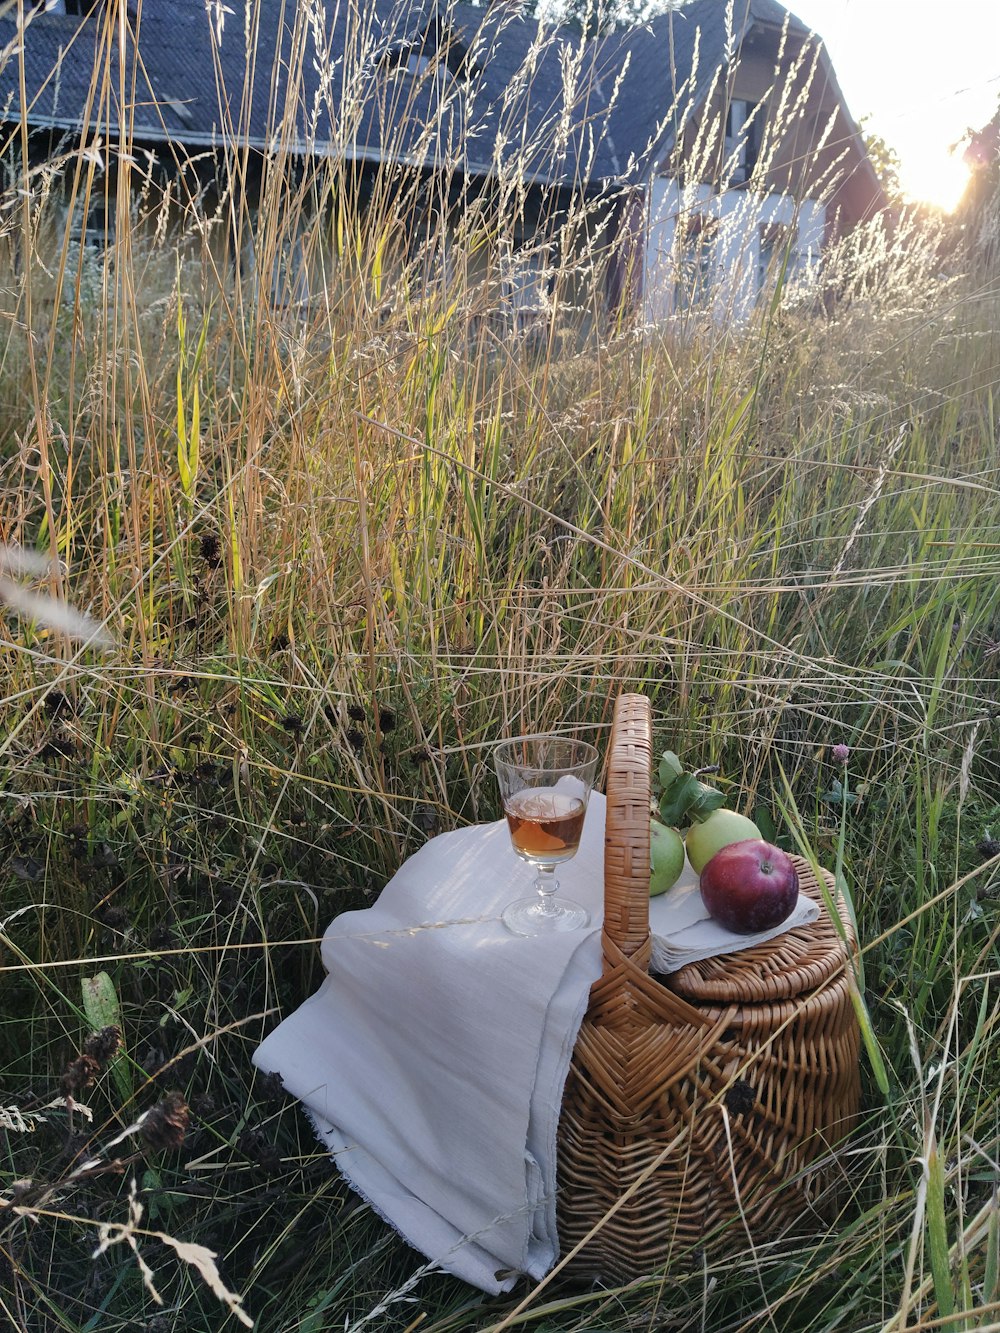 a basket of fruit and a glass of wine in a field